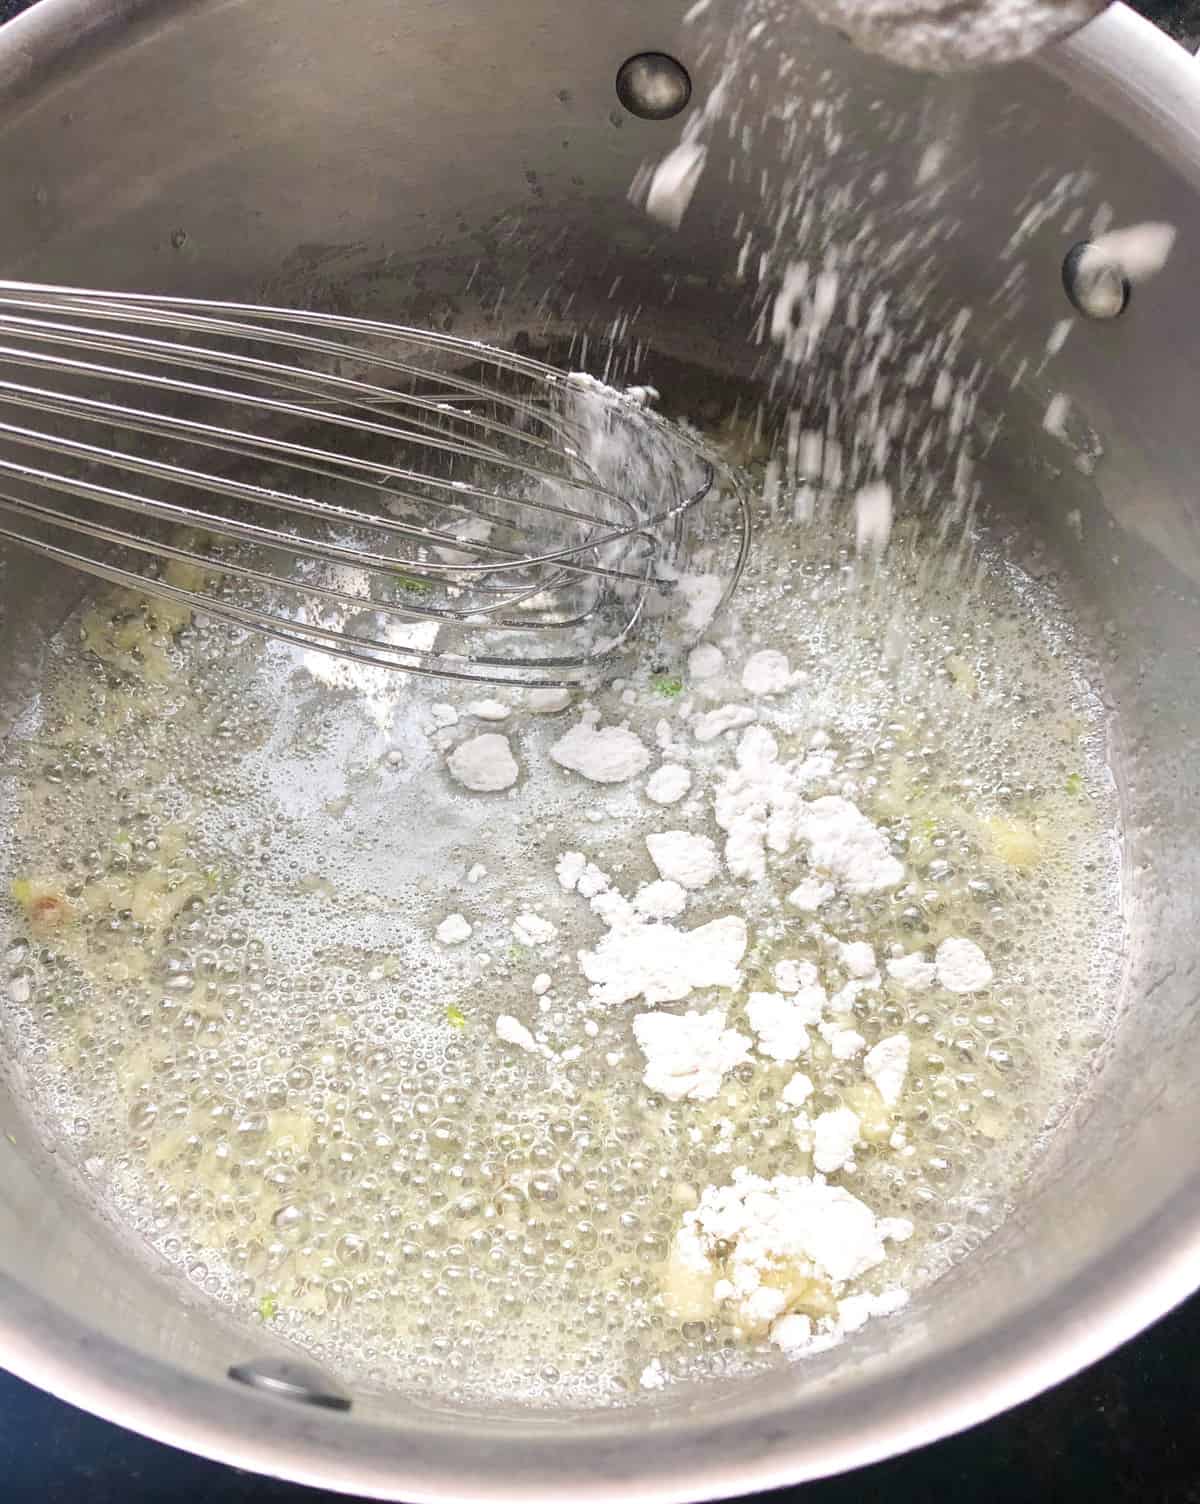 Add the butter and melt over medium heat. Add in the minced garlic and stir for about 15 seconds, then whisk in the remaining flour to start a roux.